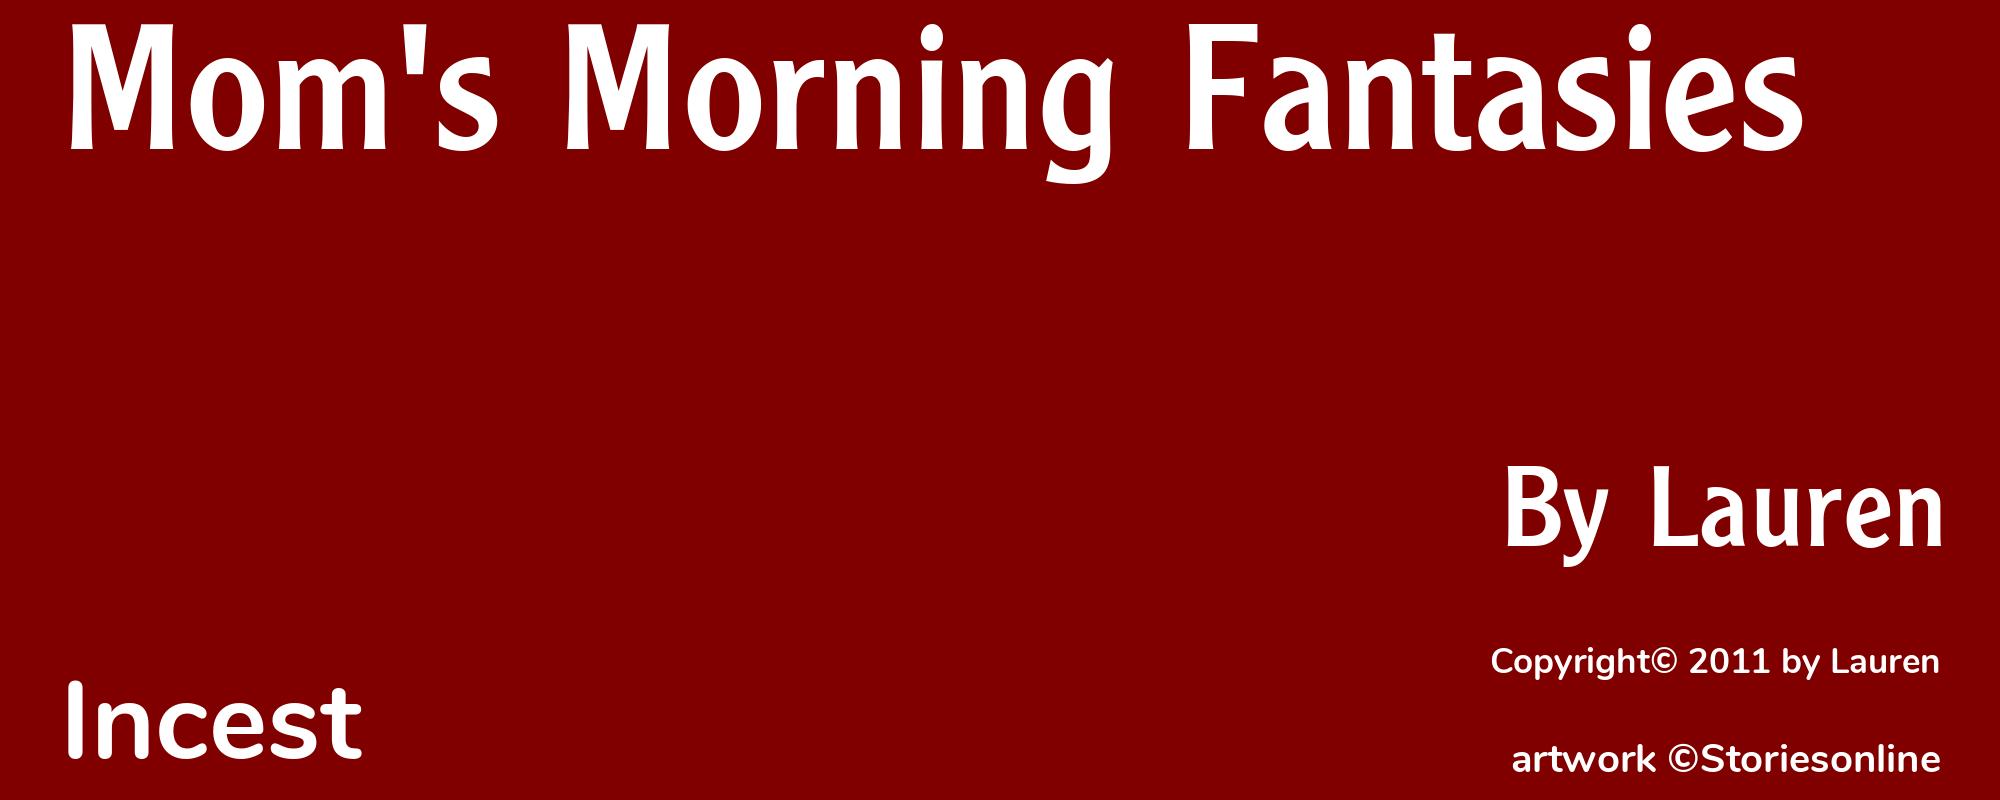 Mom's Morning Fantasies - Cover